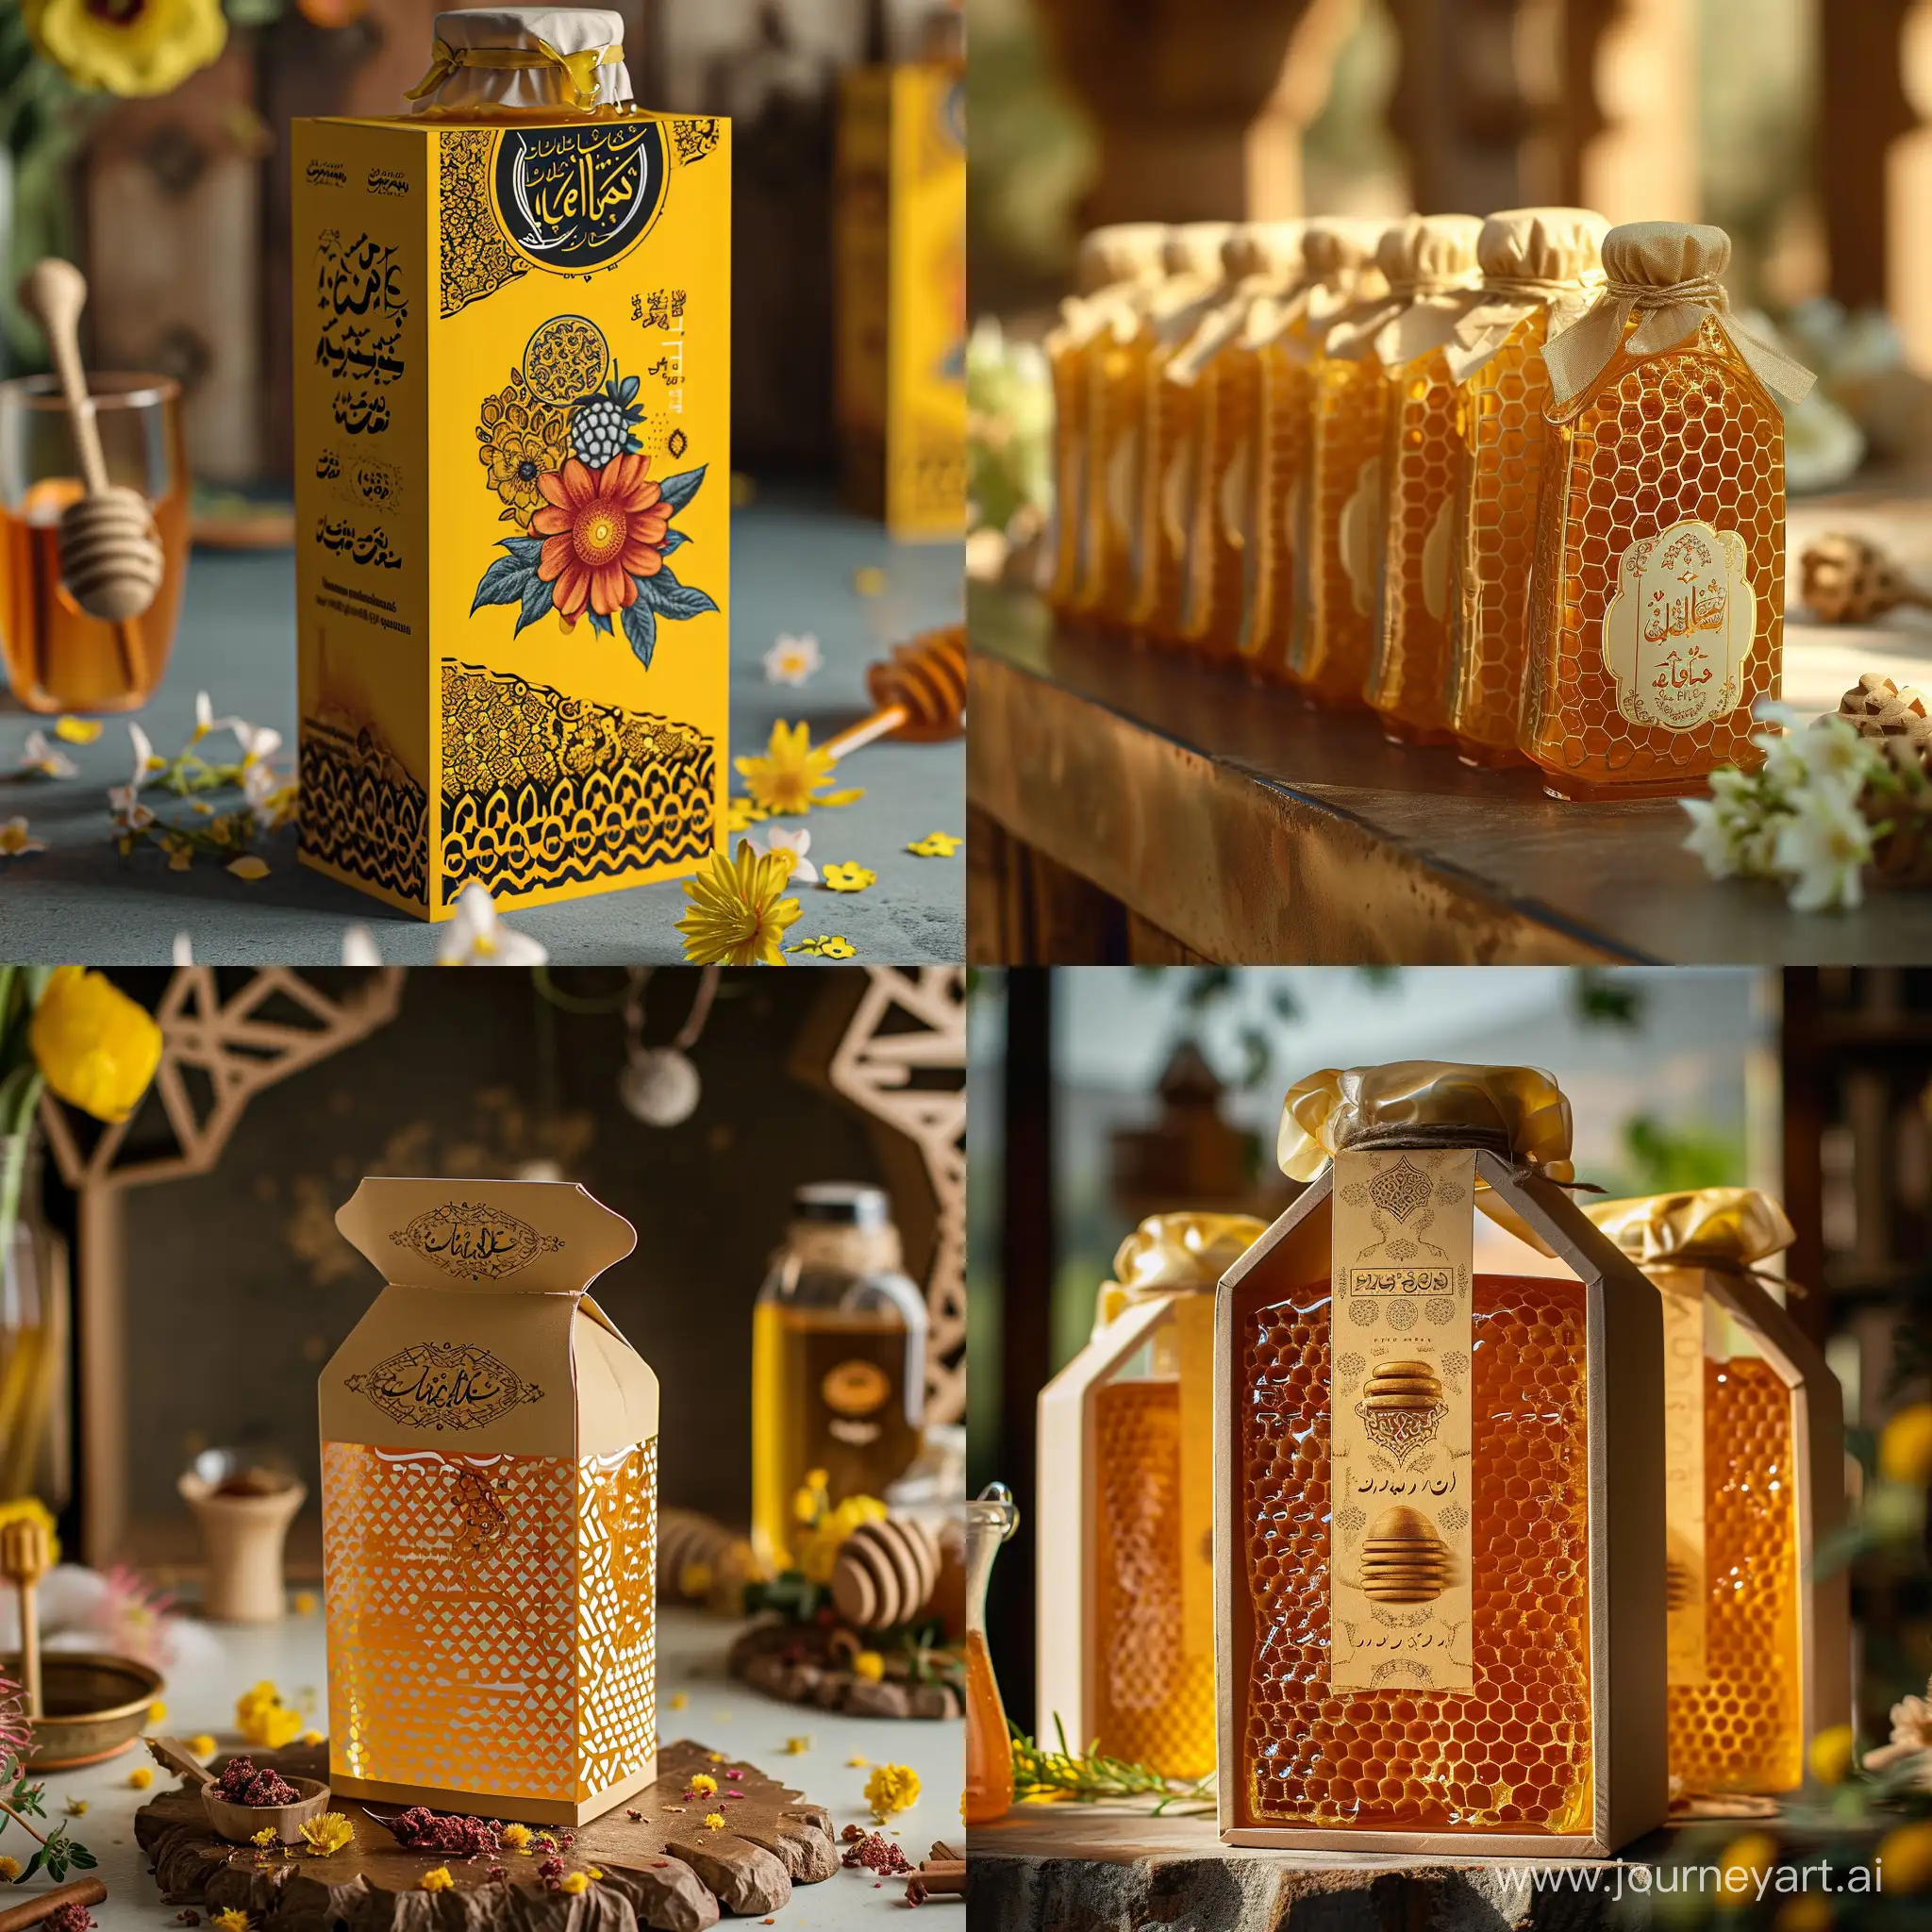 Give me the most creative packaging of honey. use Persian design elements.